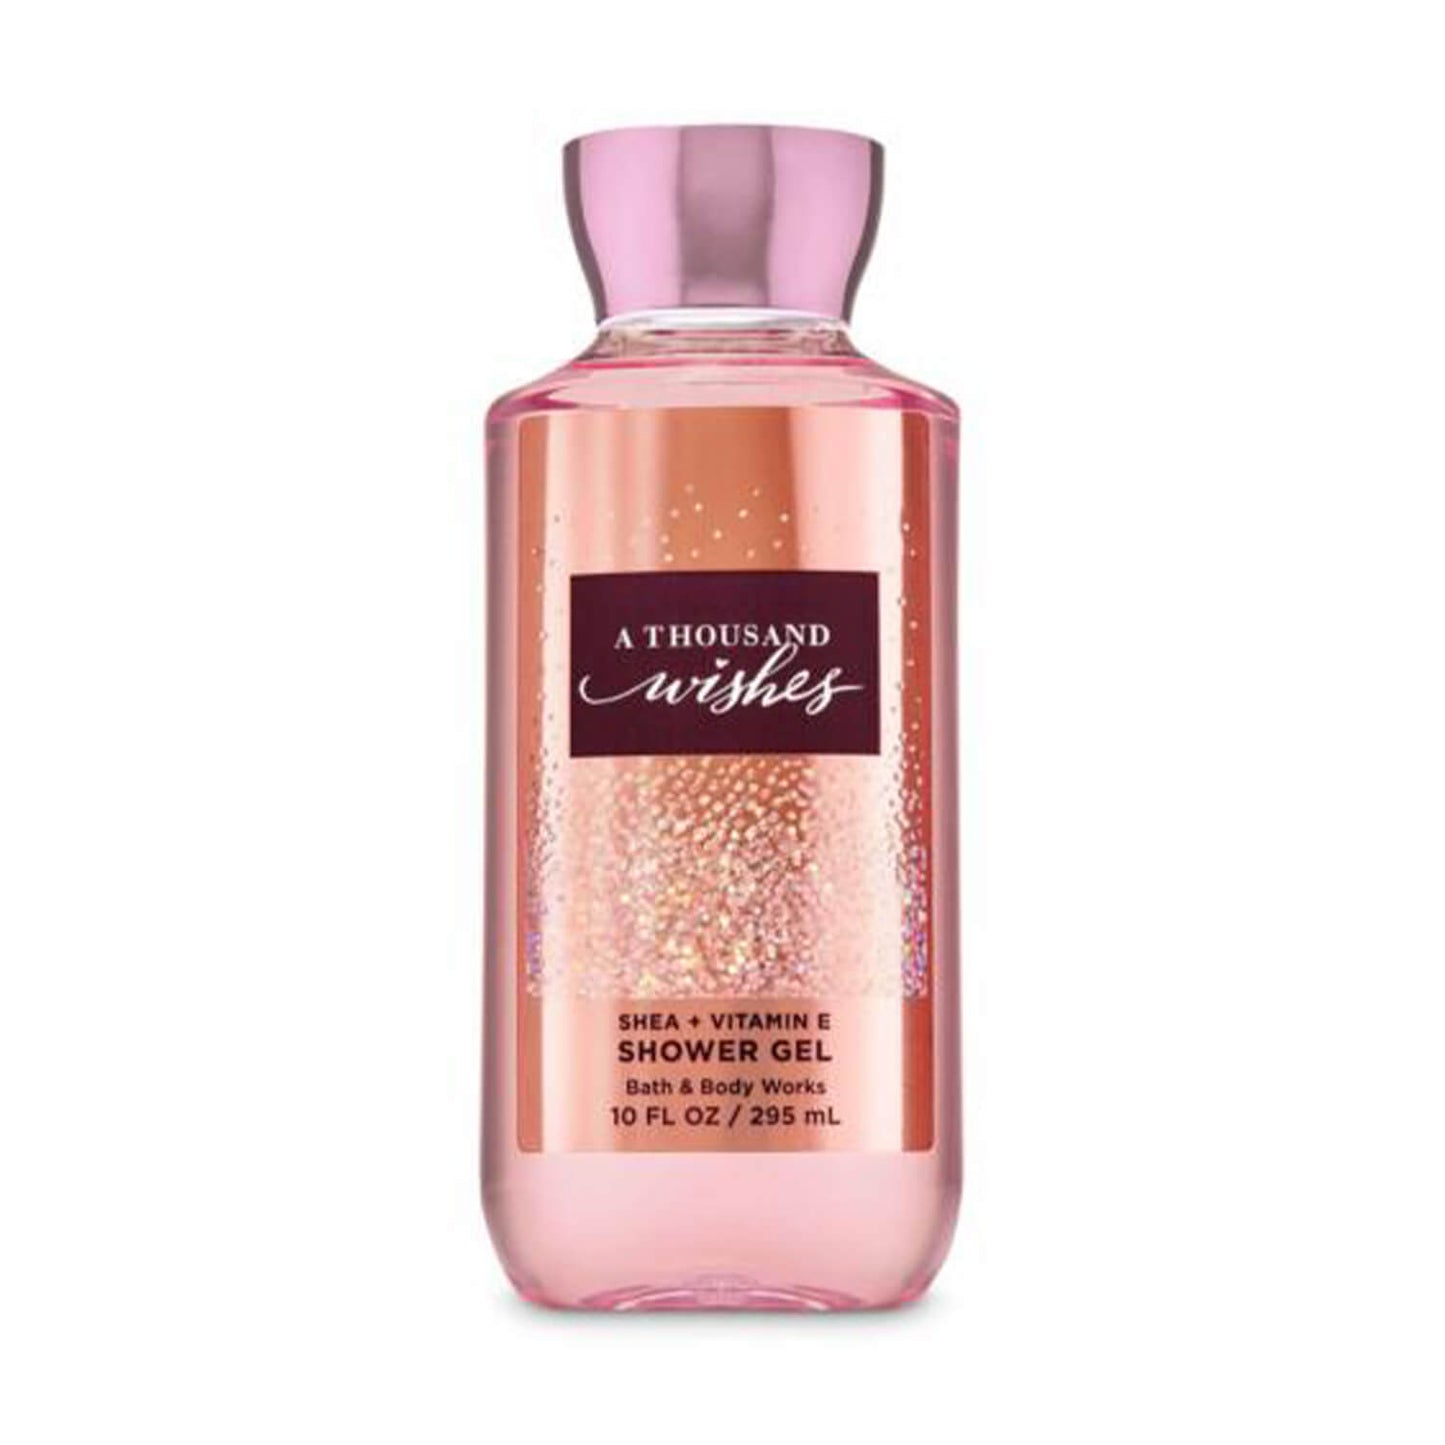 Bath and Body Works Shower Gel - A Thousand Wishes